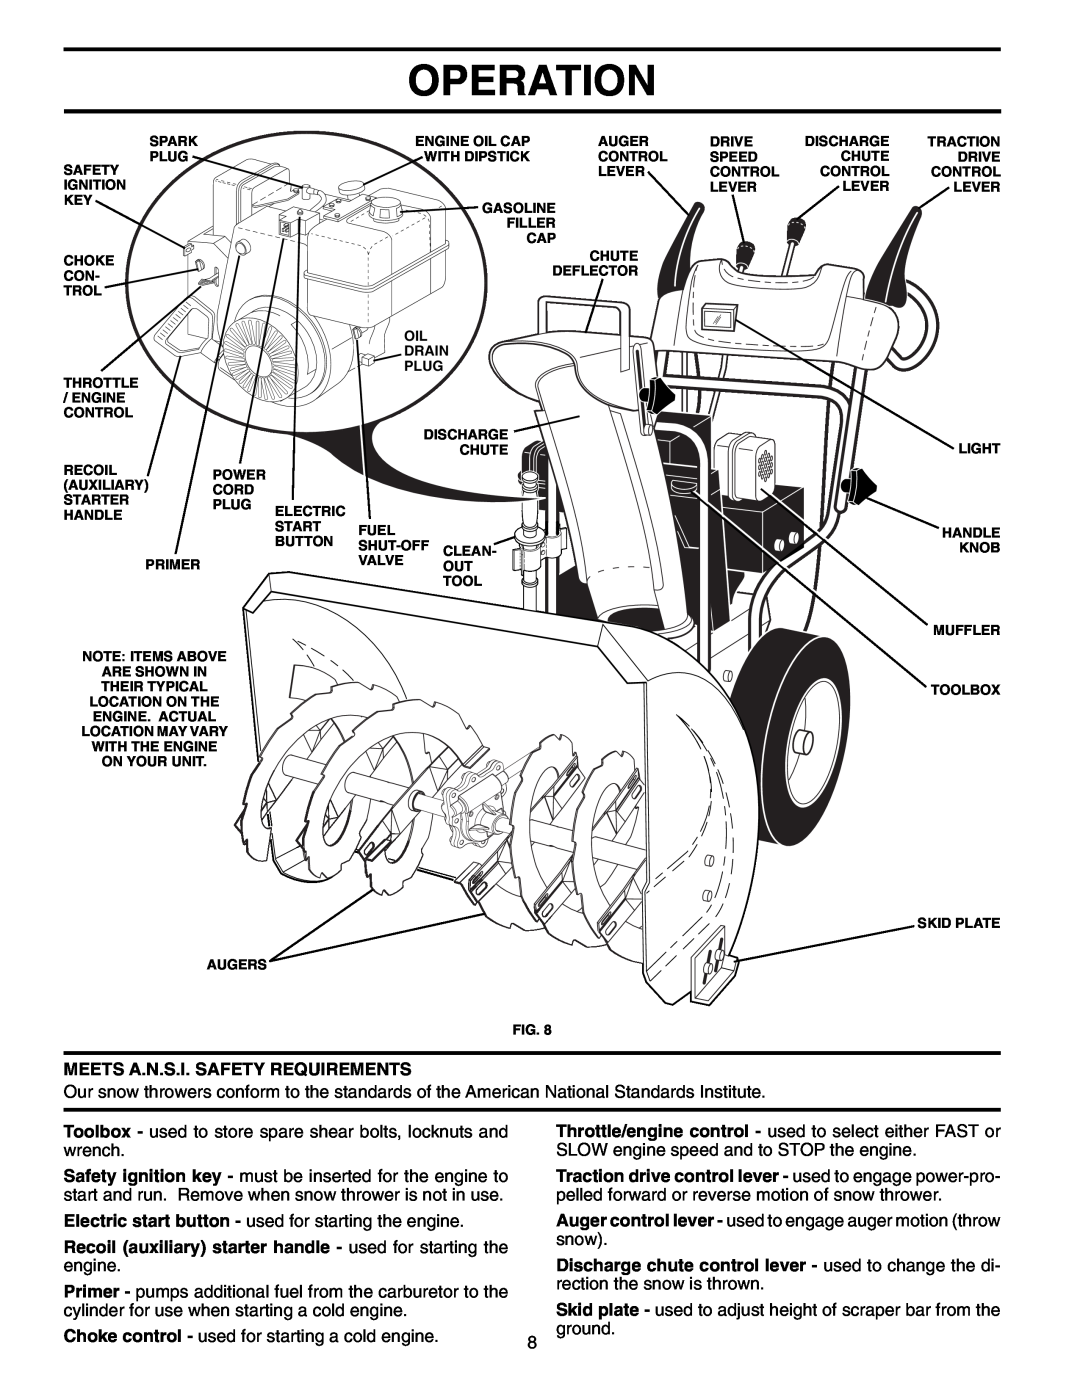 Poulan 199434 owner manual Operation, Meets A.N.S.I. Safety Requirements 